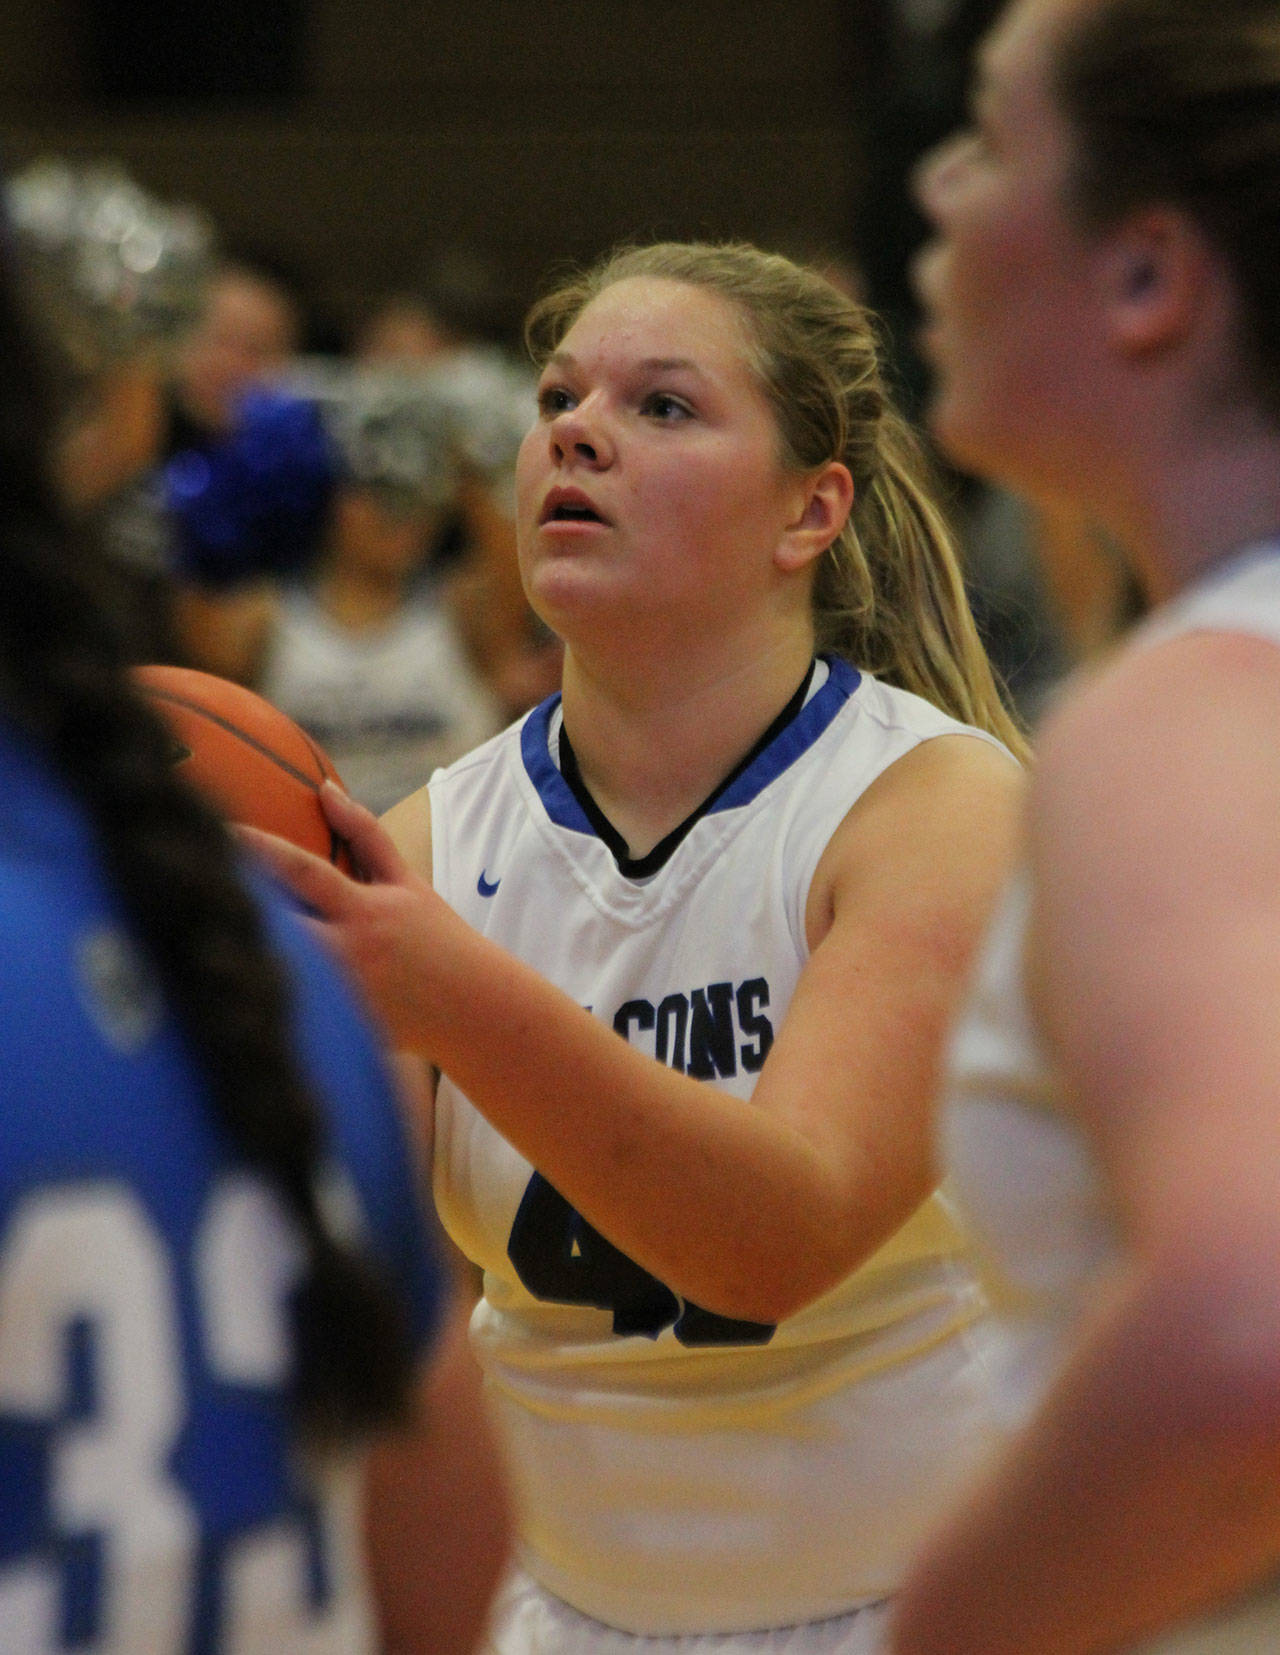 Rachel Harder prepares to shoot a free throw in the Sedro-Woolley game Wednesday. (Photo by Jim Waller/South Whidbey Record)